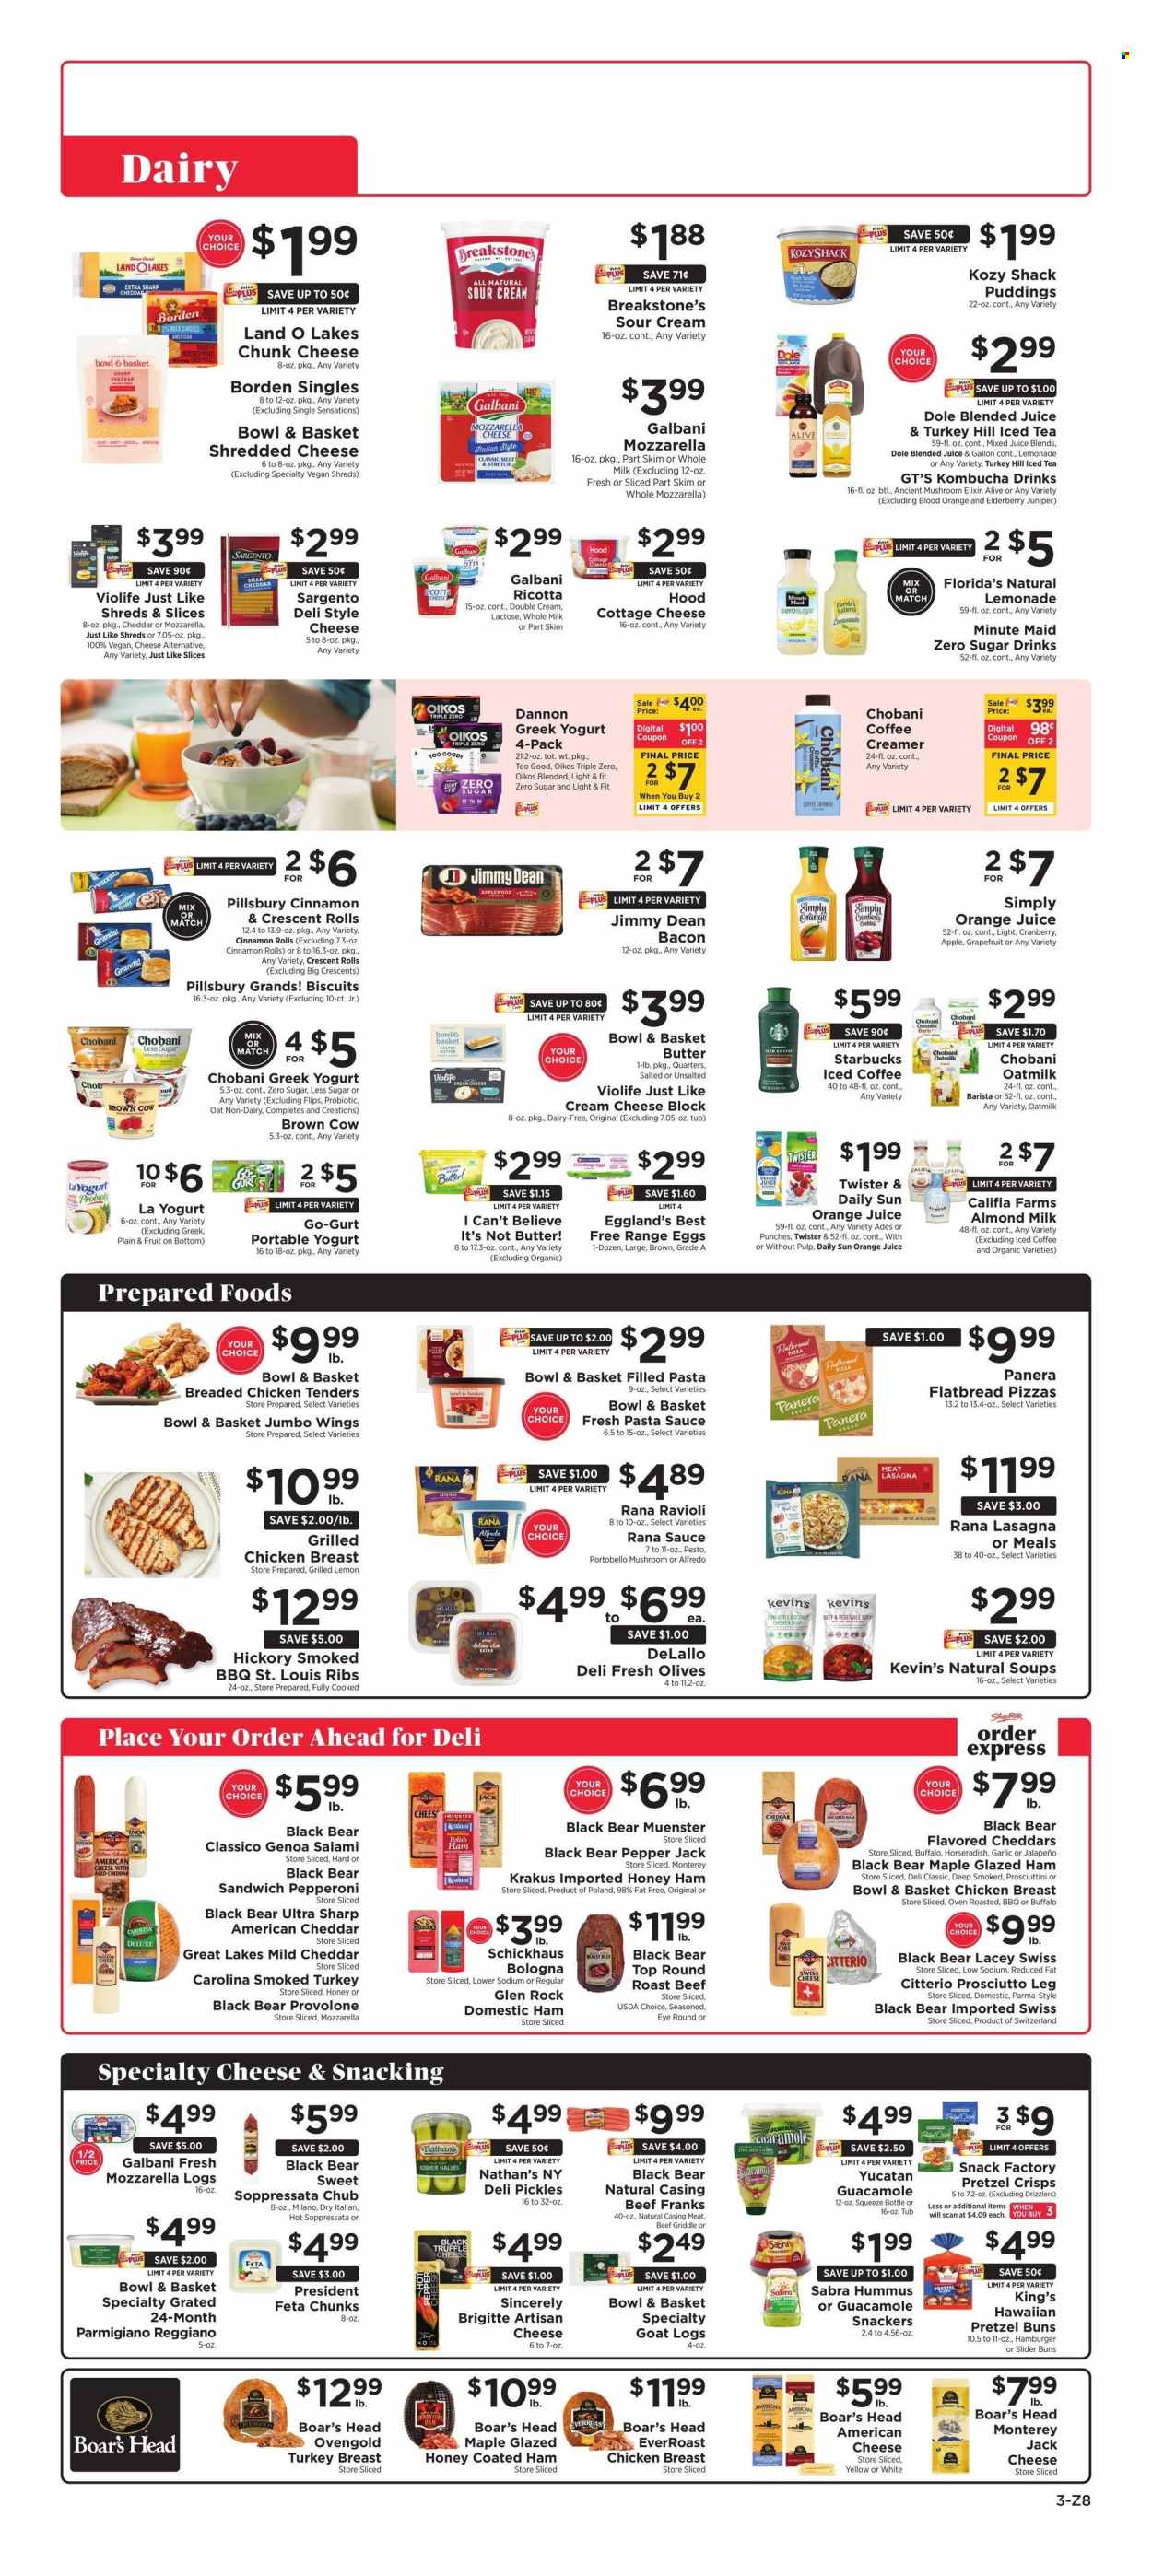 thumbnail - ShopRite Flyer - 08/02/2024 - 08/08/2024 - Sales products - cinnamon roll, crescent rolls, pudding, mozzarella, cheese, sour cream, kombucha, chunk cheese, sandwich slices, shredded cheese, ricotta, lemonade, orange juice, juice, plant based product, almond milk, plant-based milk, pretzel crisps, crisps, salami, Pepper Jack cheese, roast, roast beef, beef meat, round roast, chicken breasts, chicken, feta, buns, american cheese, ready meal, chicken wings, ravioli, Rana, olives, biscuit, goat cheese, turkey breast, turkey ham, sauce, Twister, iced coffee, coffee drink, cream cheese, ham, mild cheddar, cheddar, Münster cheese, bologna sausage, swiss cheese, pickles, pickled vegetables, guacamole, yoghurt, bacon, greek yoghurt, fruit drink, Provolone, frankfurters, soppressata, Parmigiano Reggiano, hummus, Monterey Jack cheese, ice tea, breaded chicken, eggs, flatbread, pizza, lasagna meal, soup, cottage cheese, pasta, filled pasta, pasta sauce, spaghetti sauce, smoked ribs, oat milk, butter, creamer, coffee and tea creamer. Page 3.